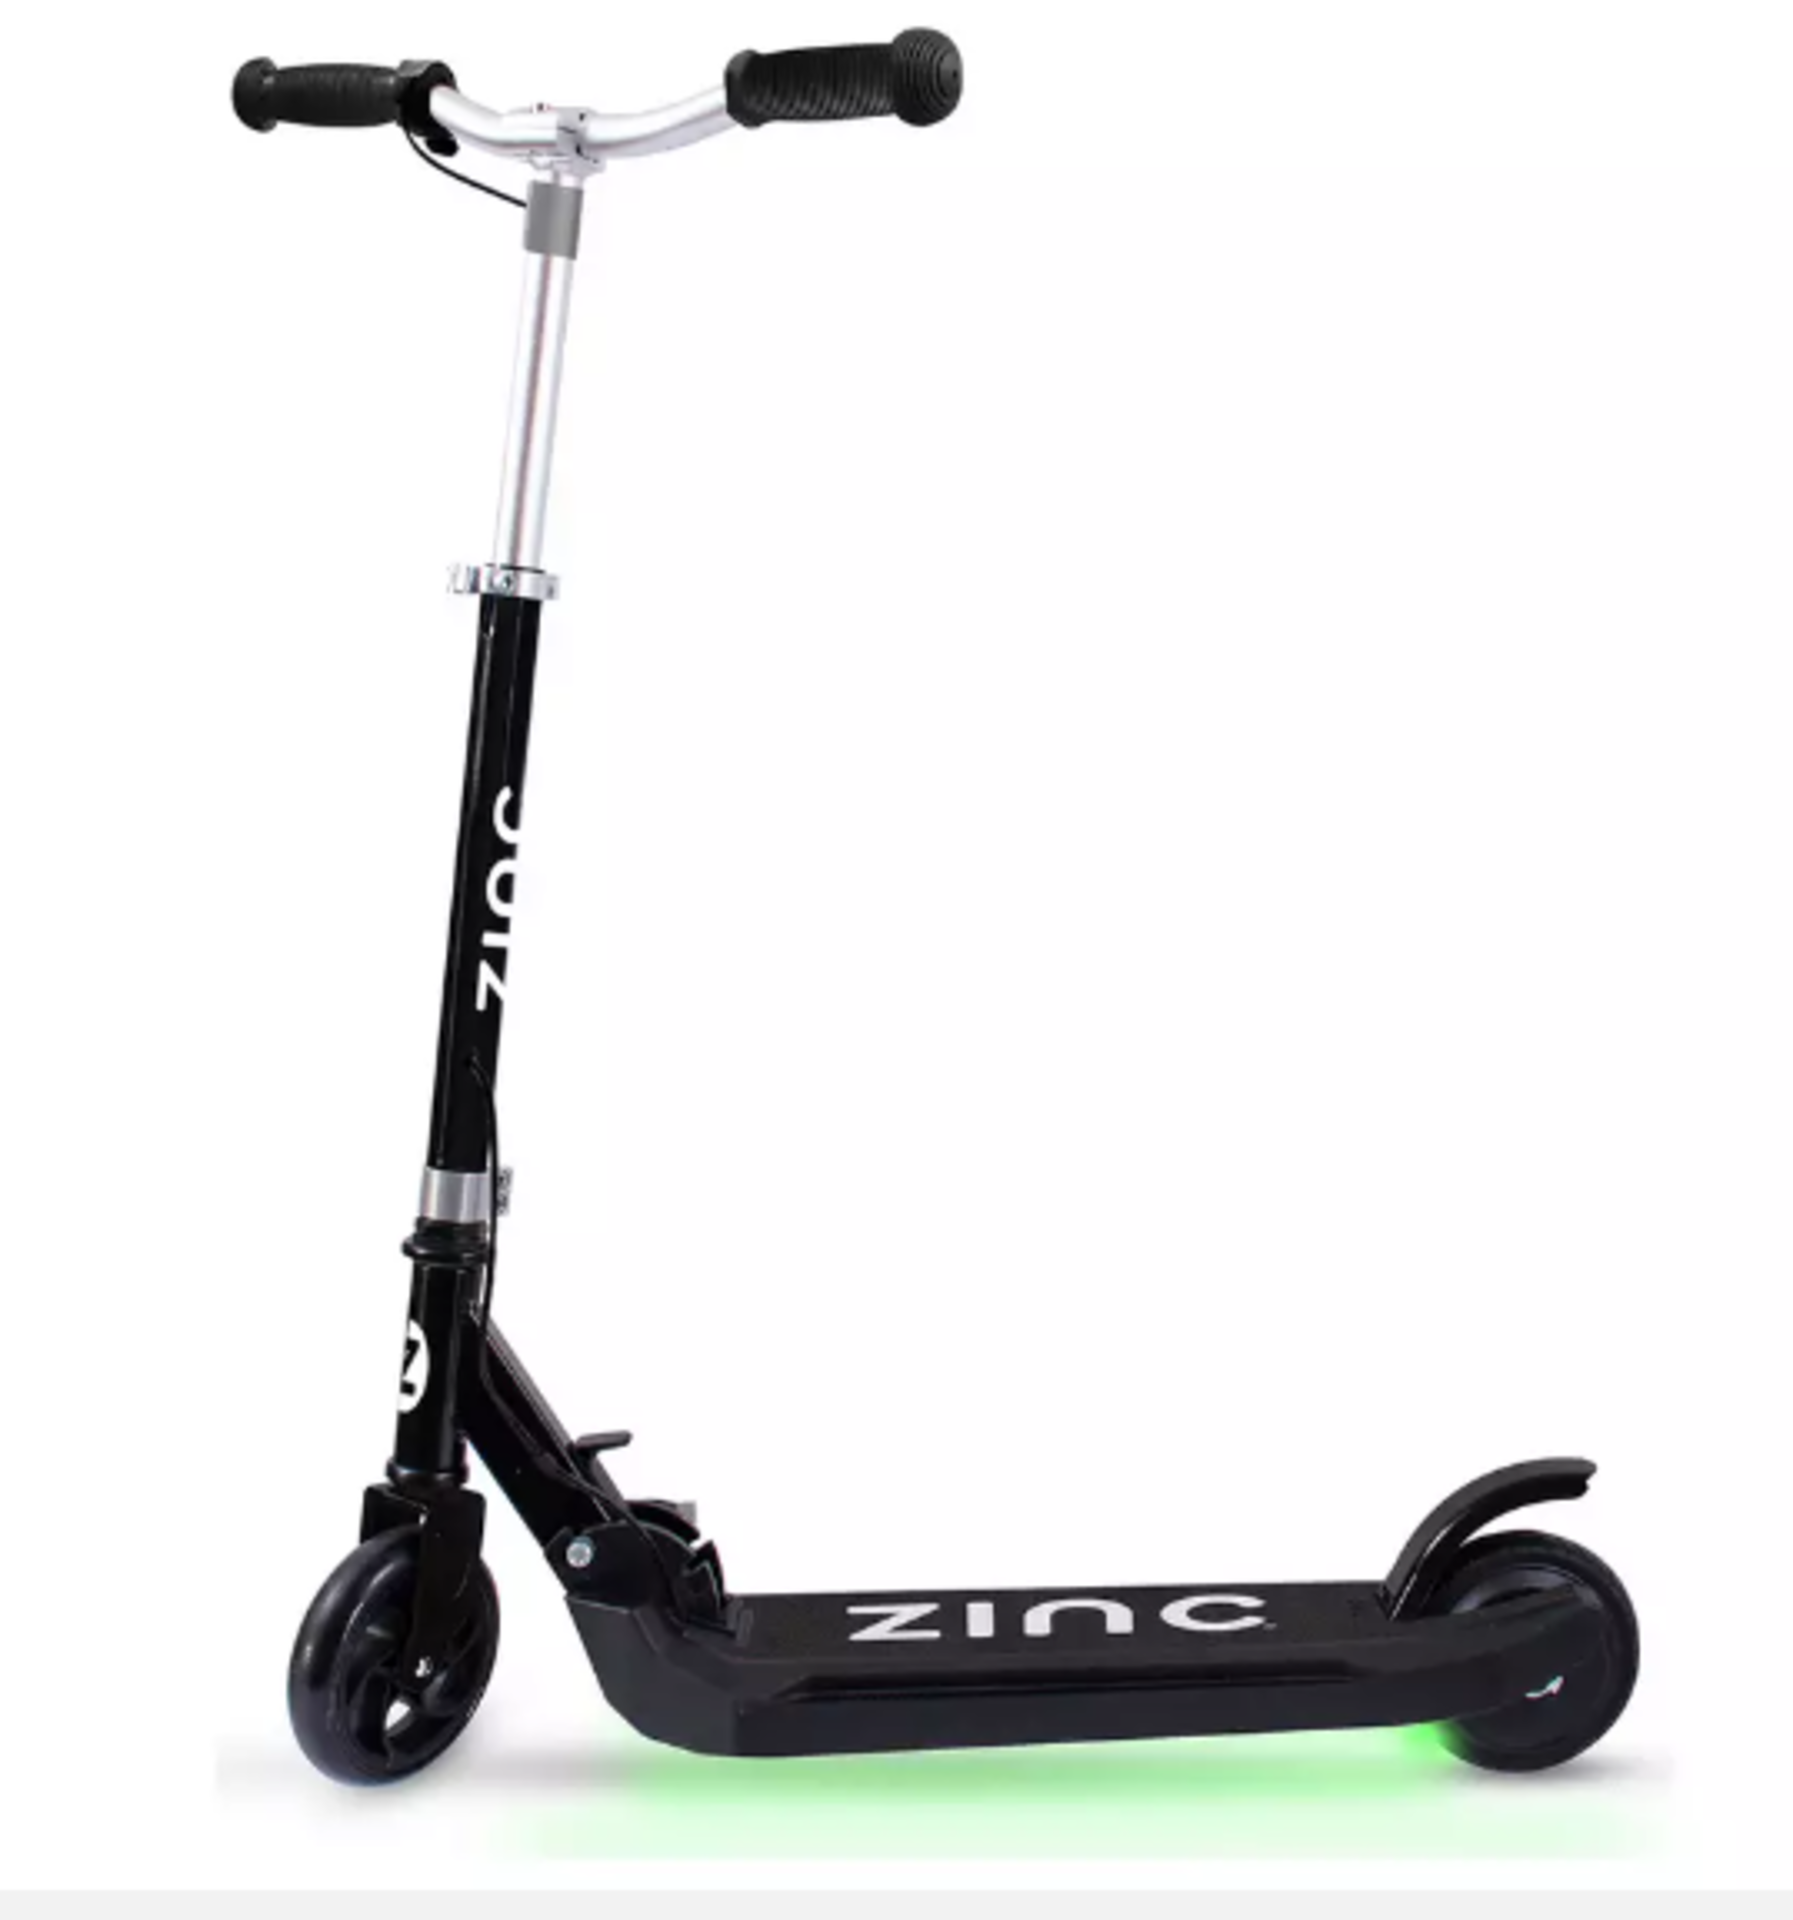 (ex85) Zinc Folding Light Up Electric E5 Scooter. RRP £195.00. There is tons of fun to be had with